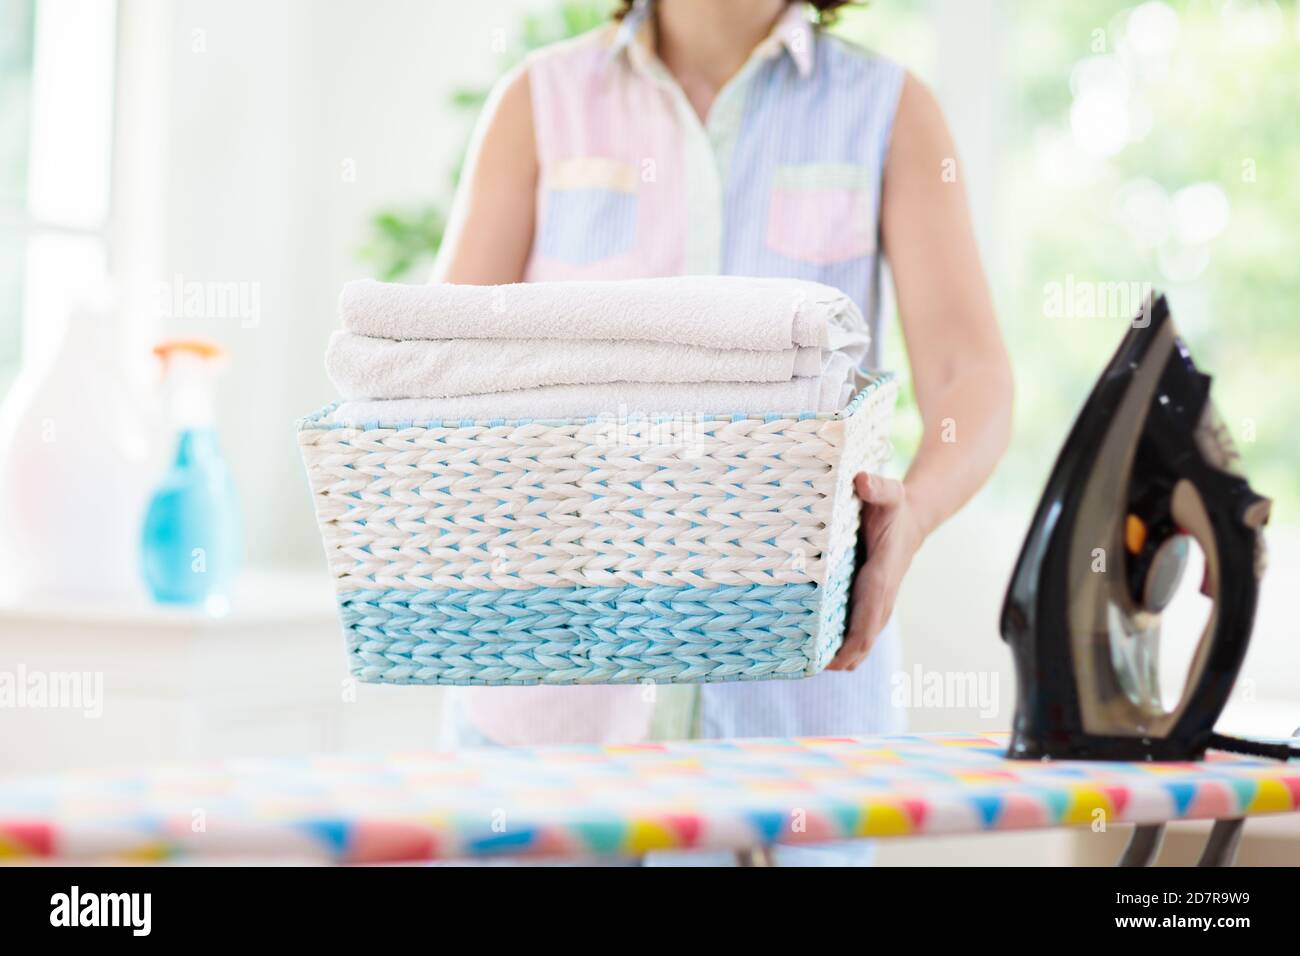 Woman ironing clothes. Female folding clothes at iron board. Home chores. Housewife cleaning house. Stock Photo